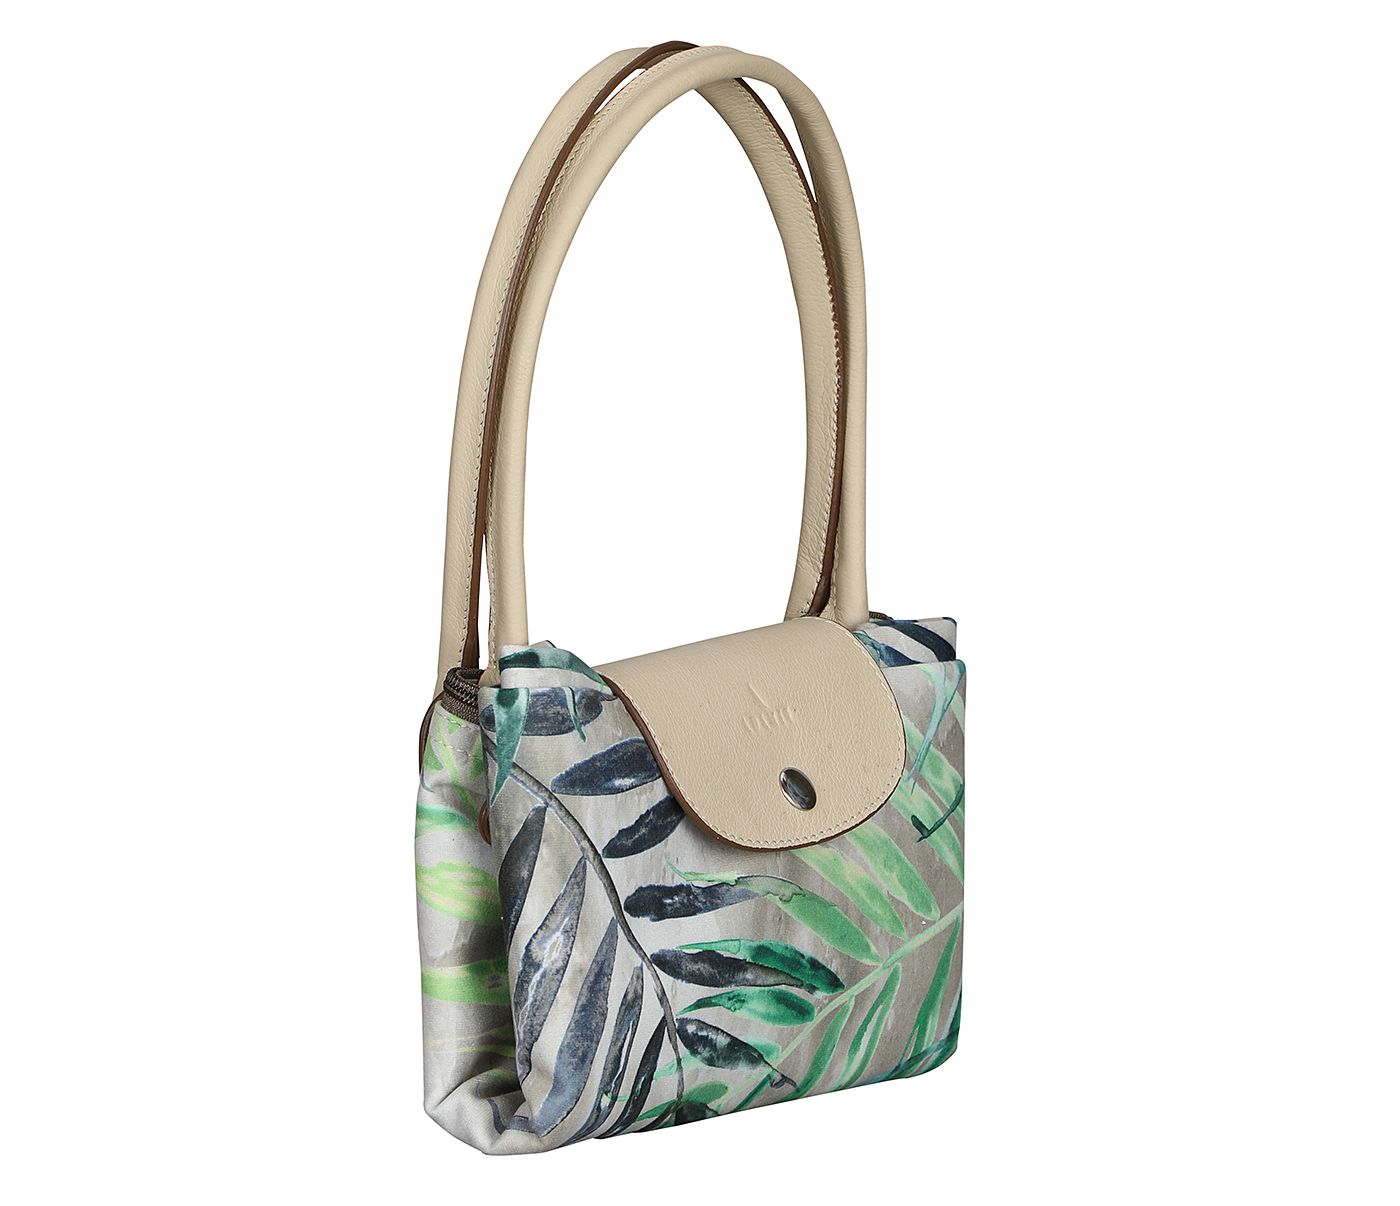 B882--Adelina Folding tote  in leaf print material with genuine leather handles and flap - Green